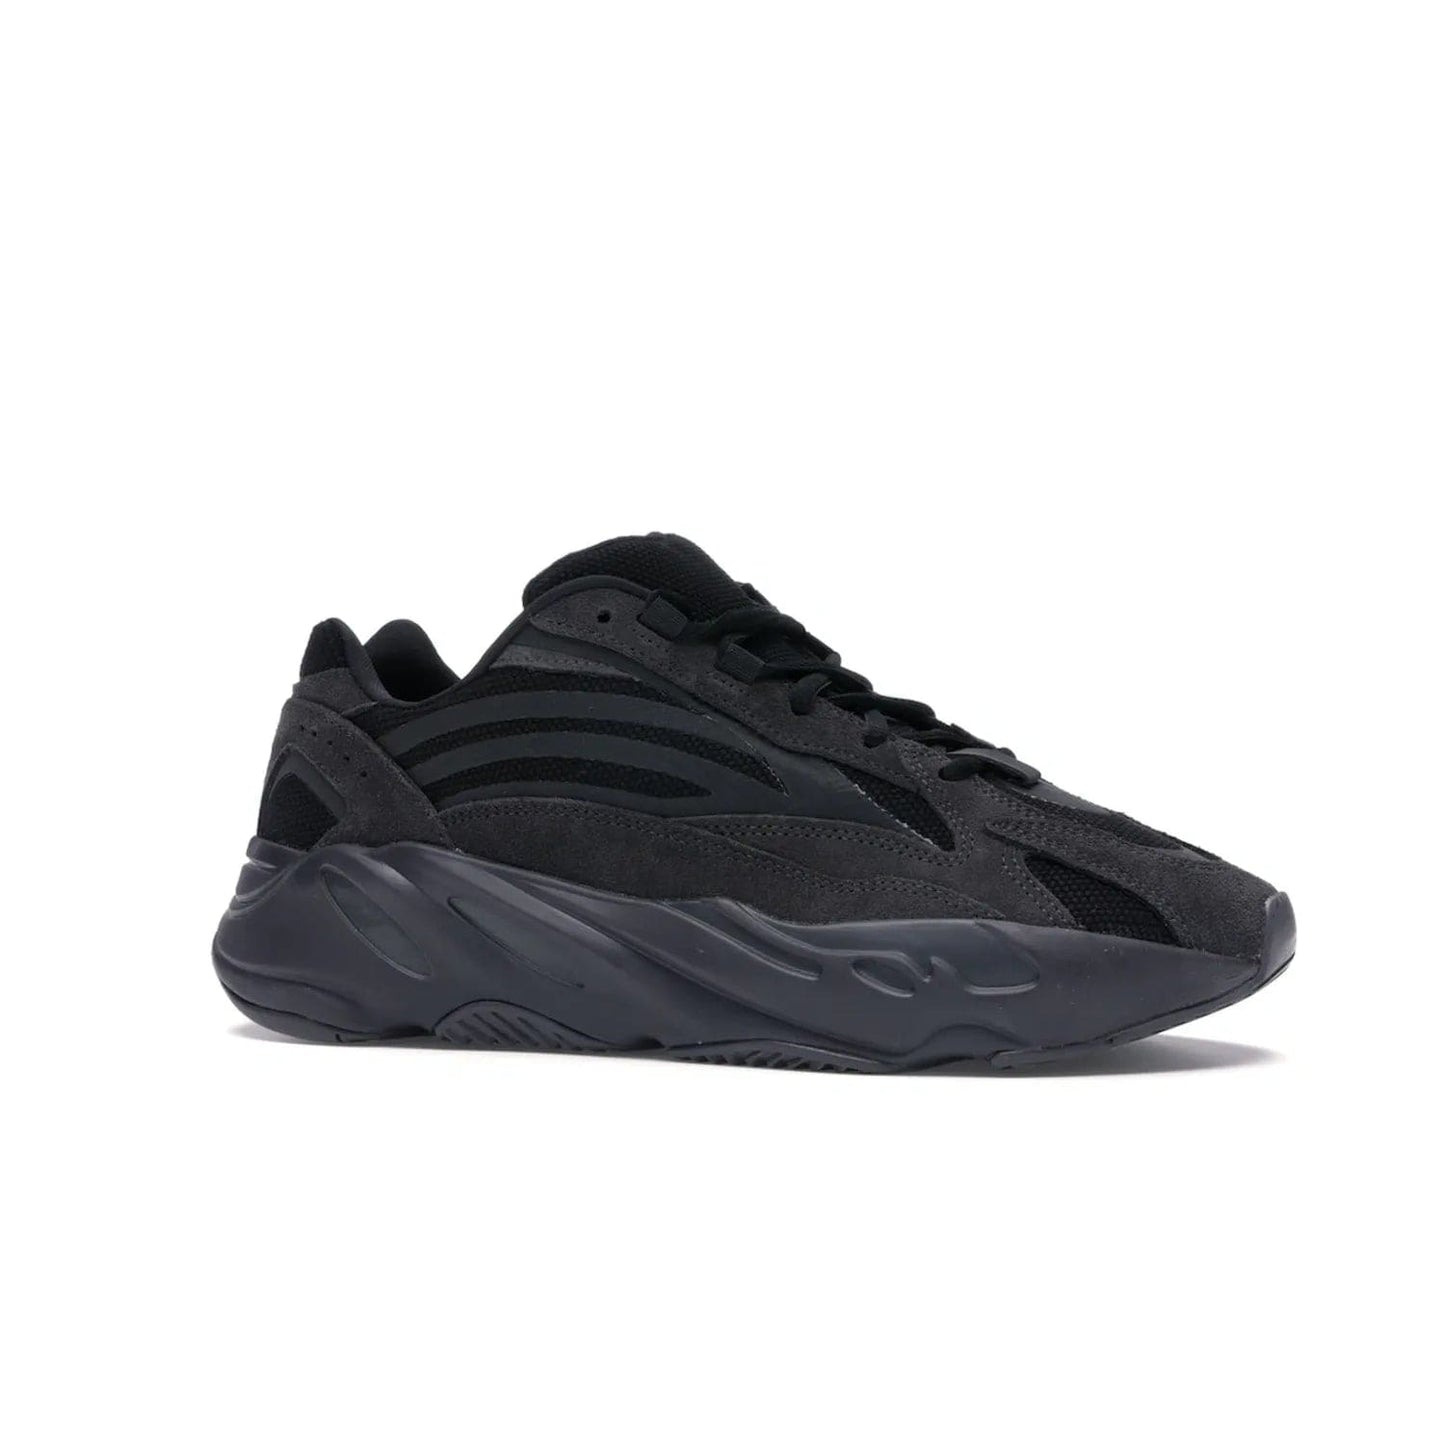 adidas Yeezy Boost 700 V2 Vanta - Image 3 - Only at www.BallersClubKickz.com - Introducing the adidas Yeezy Boost 700 V2 Vanta - a sleek and stylish all-black design featuring a combination of mesh, leather, and suede construction with signature Boost cushioning in the sole. The ultimate in comfort and support.